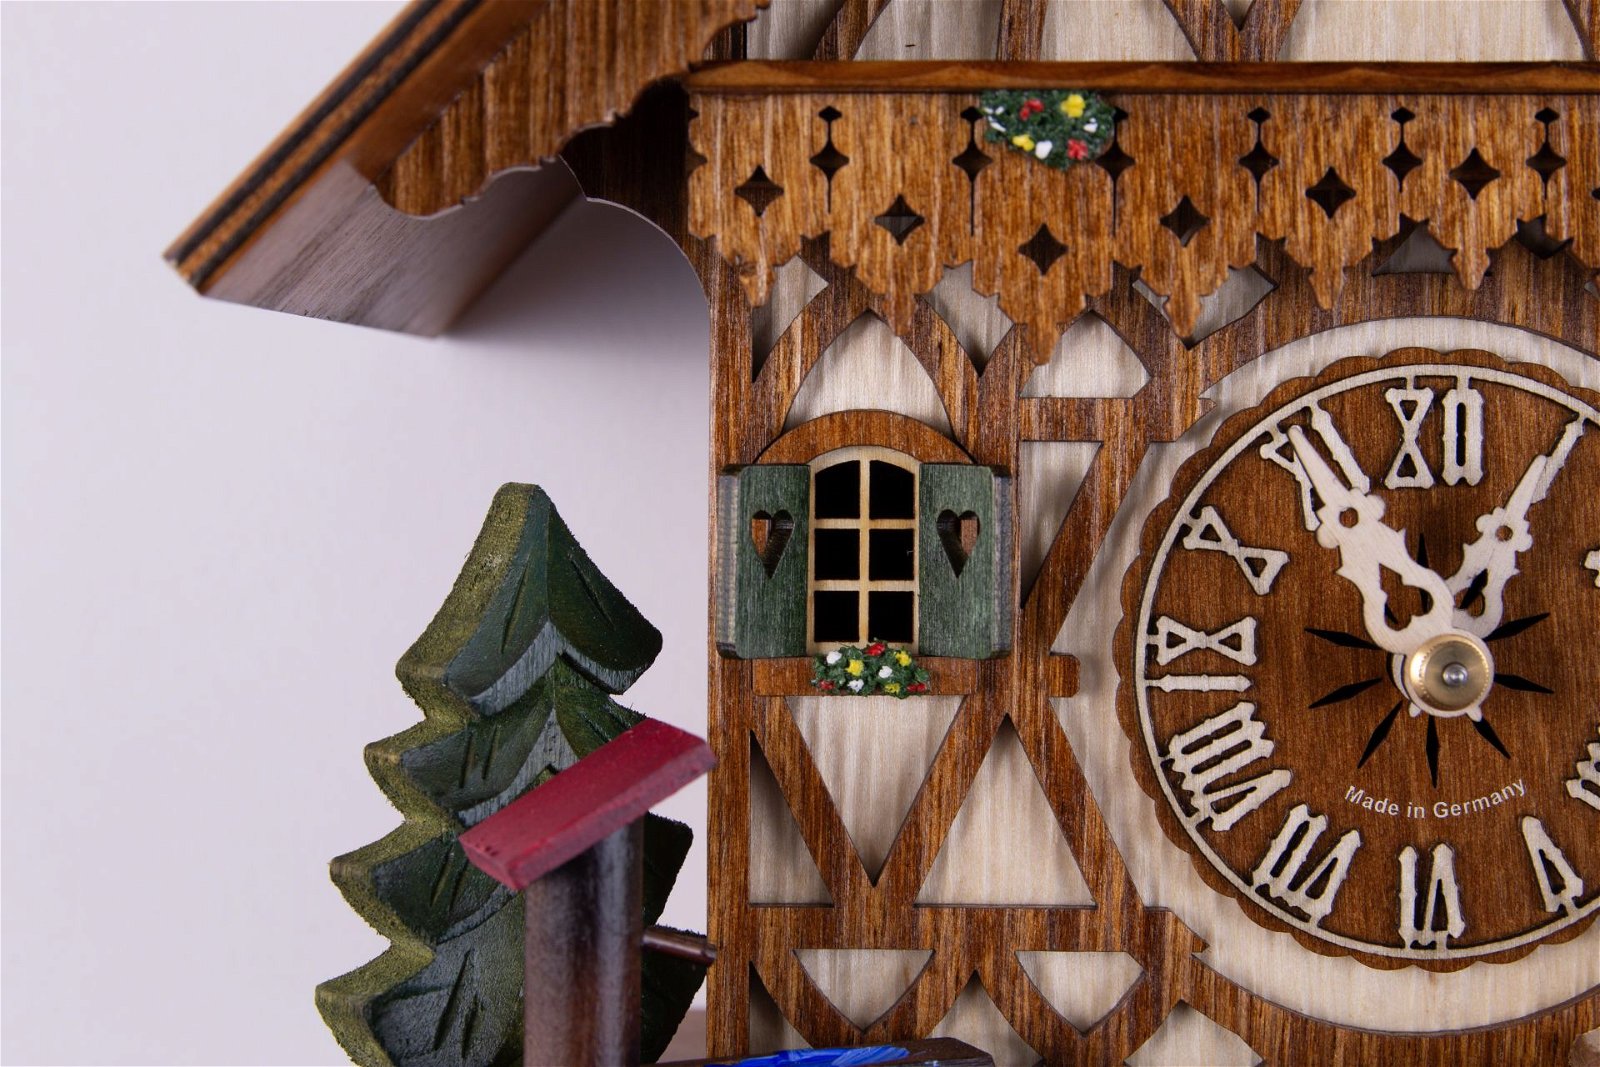 Cuckoo Clock Chalet Style 8 Day Movement 28cm by Hekas